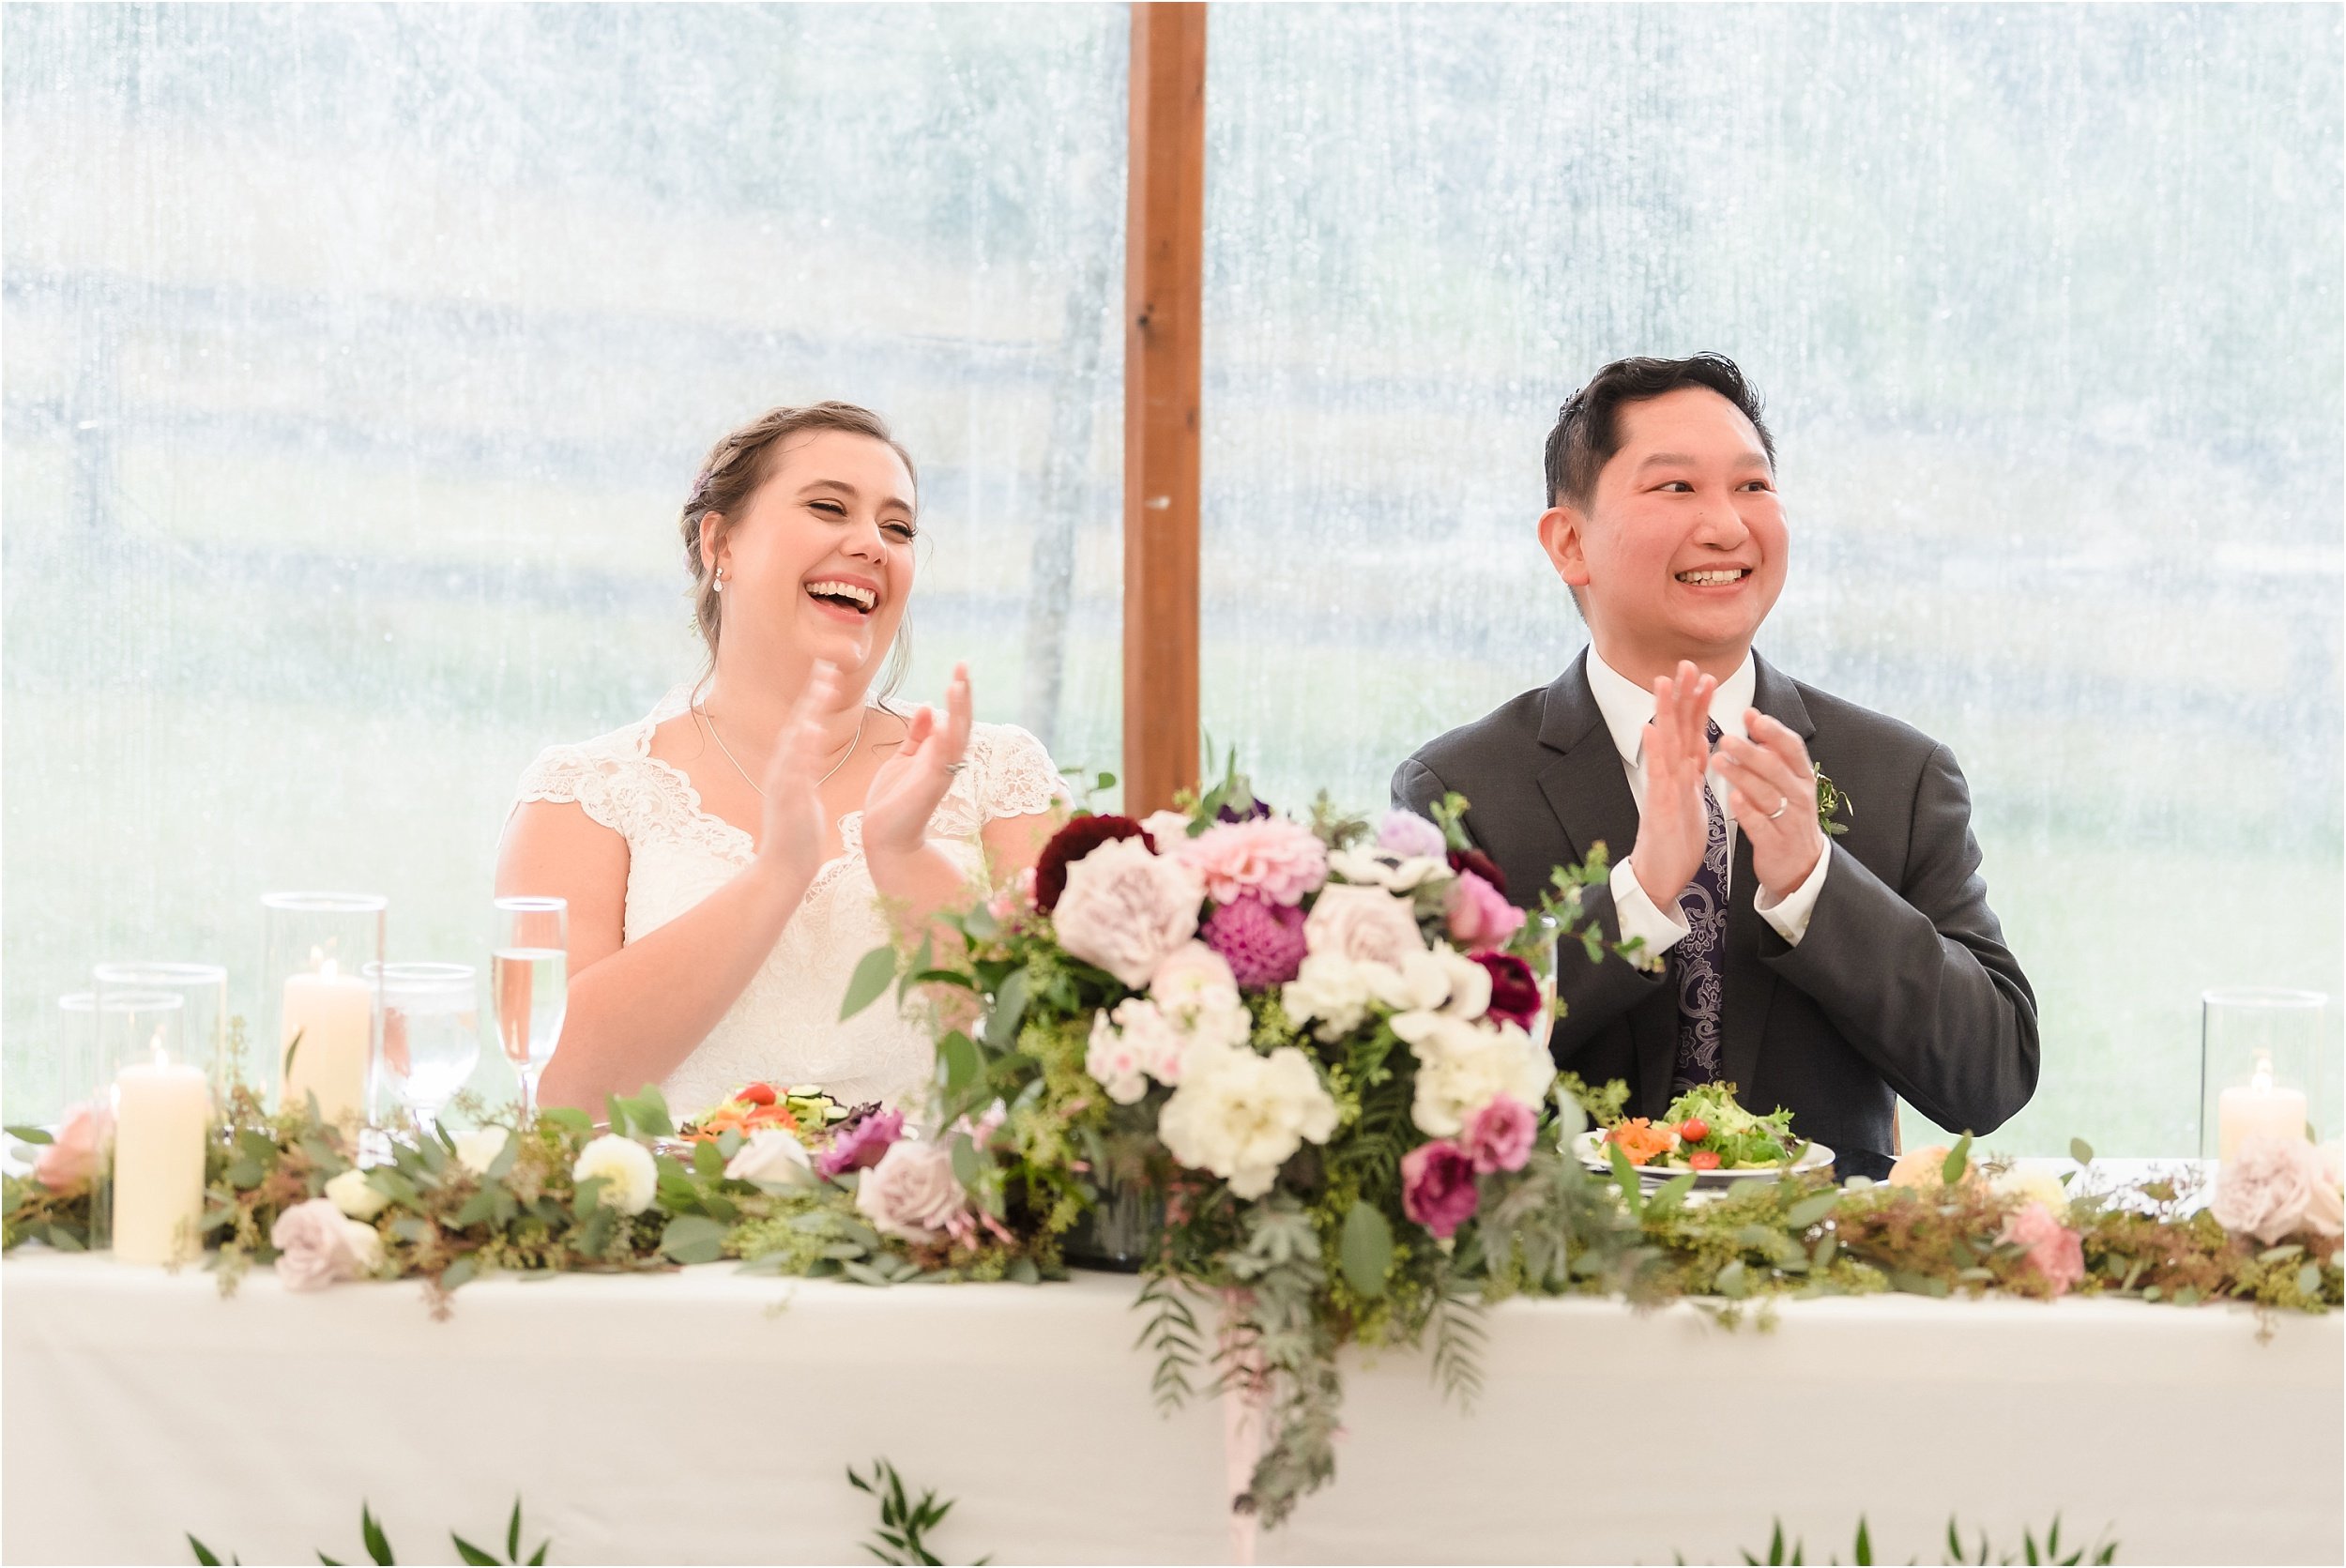  A man and woman laugh and clap following a toast from a groomsman.  